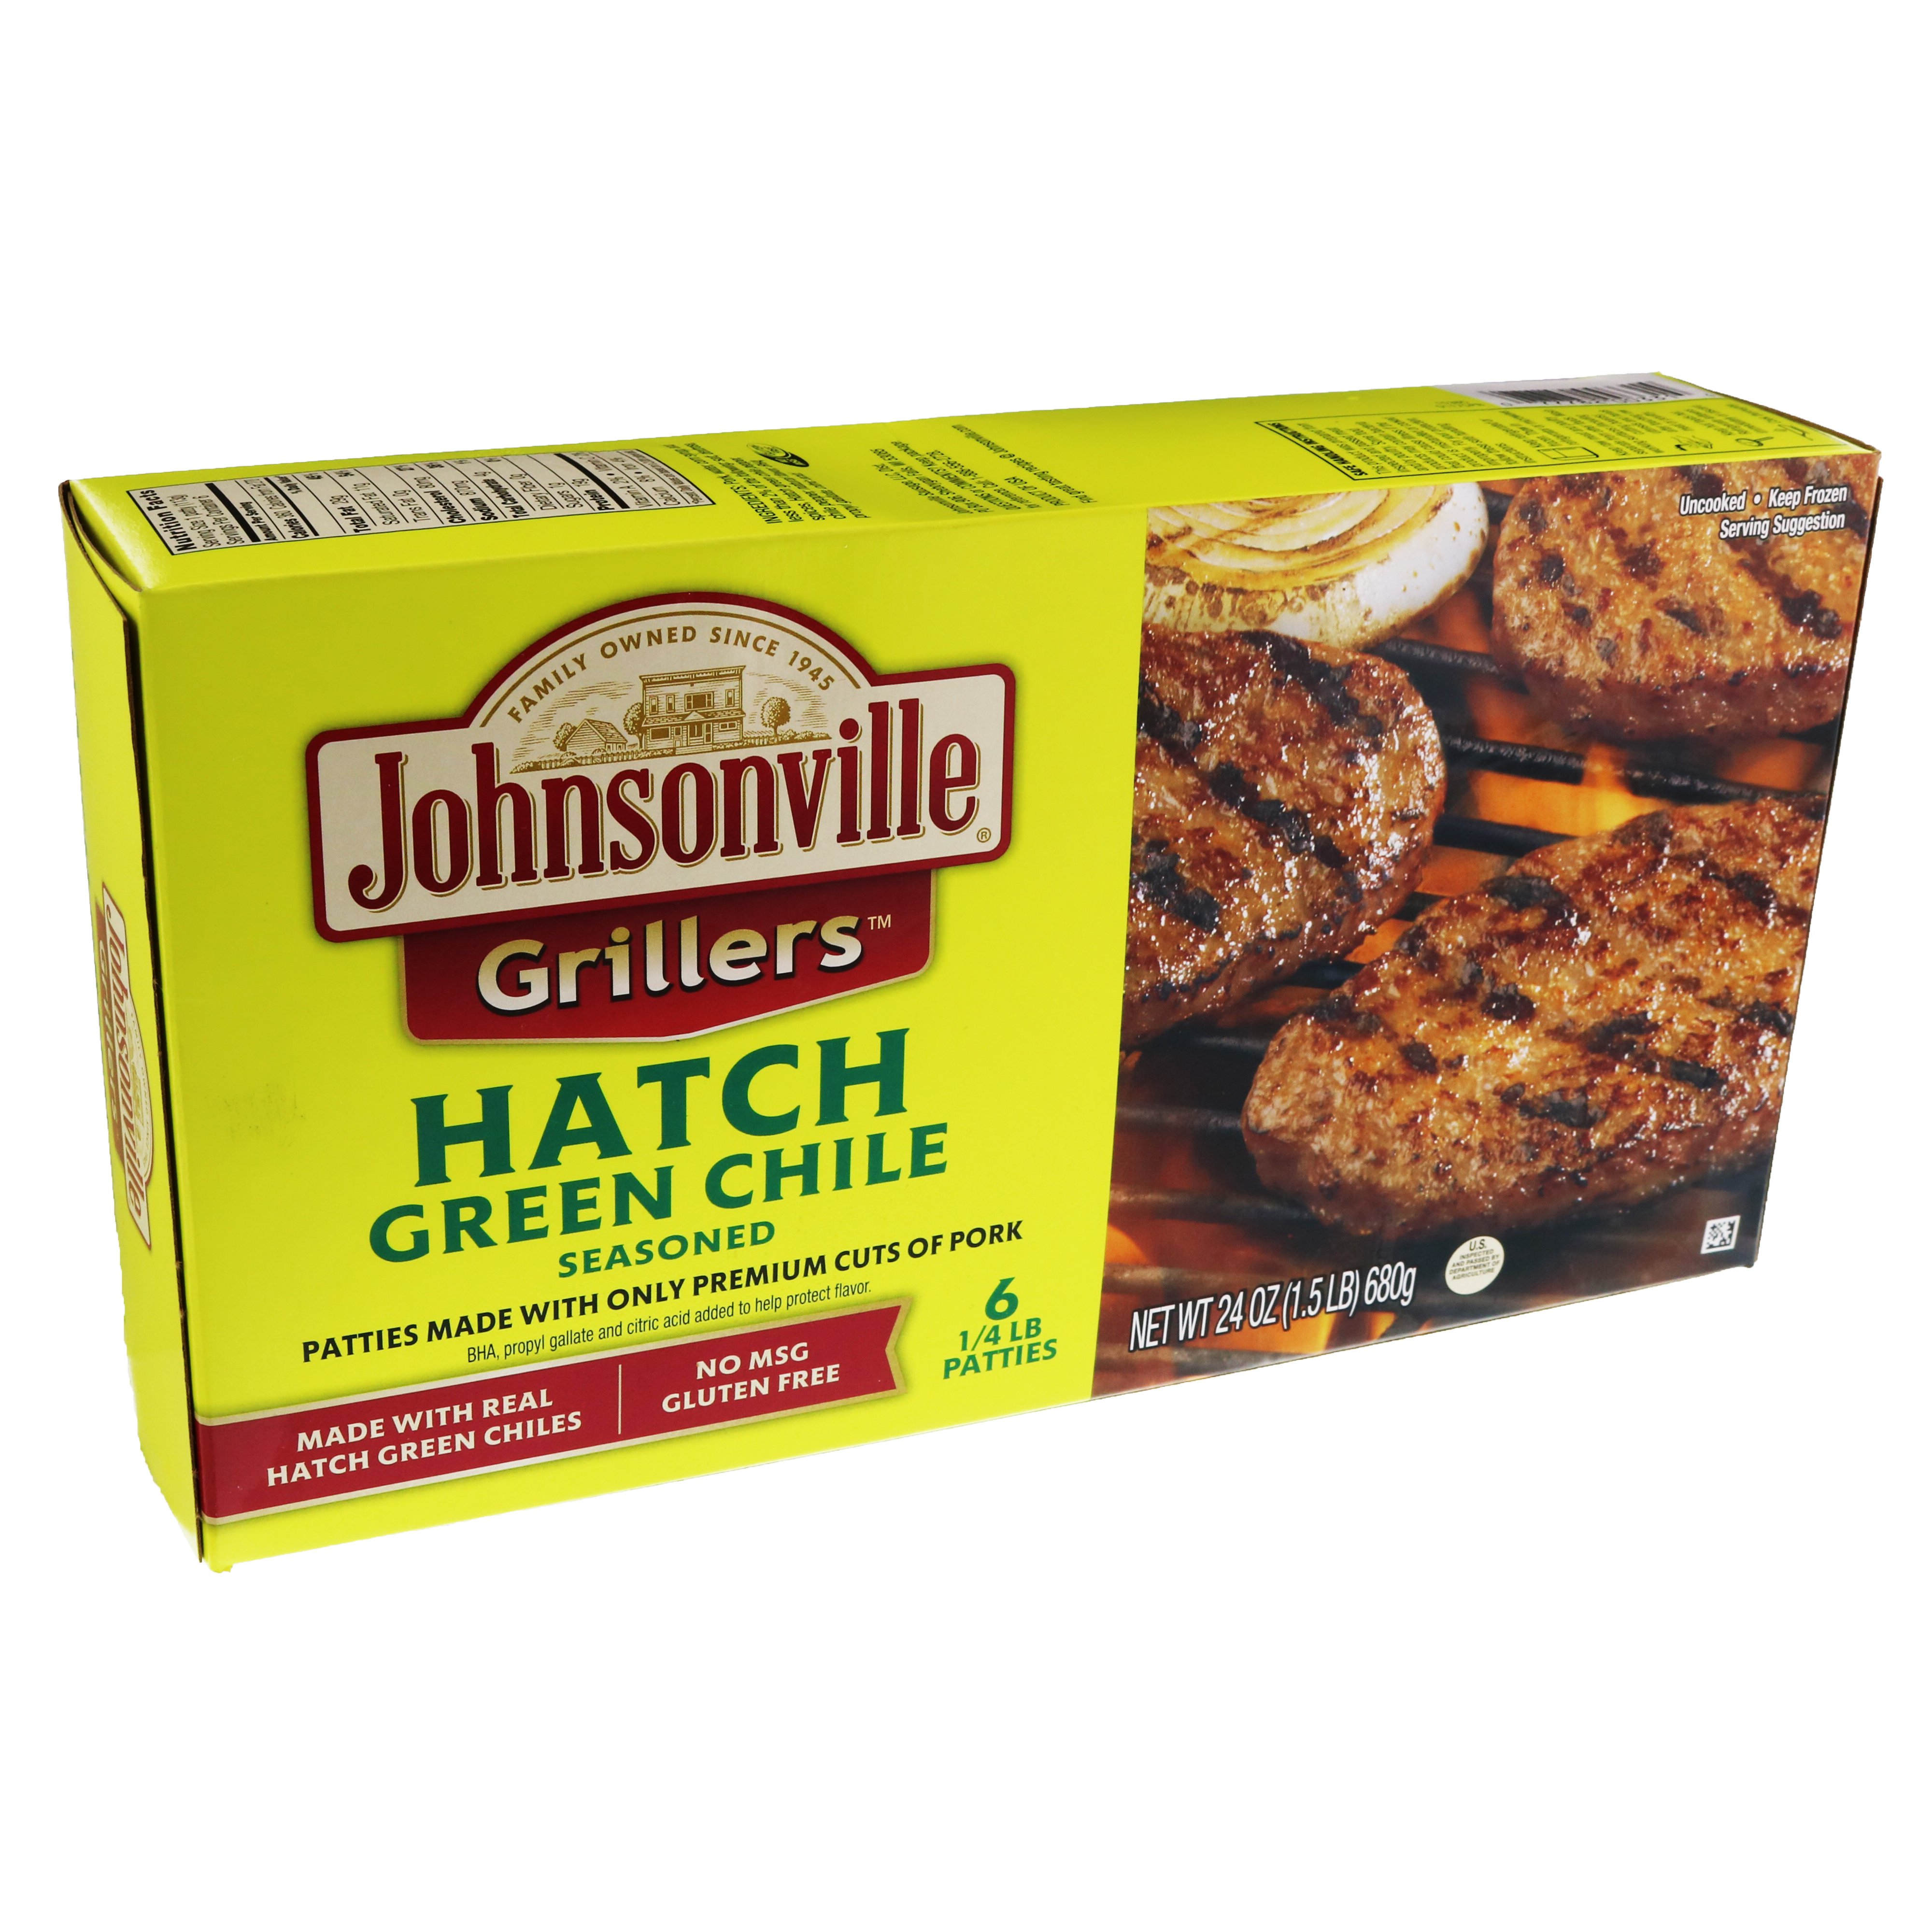 Johnsonville Grillers Hatch Green Chili Shop Pork at HEB